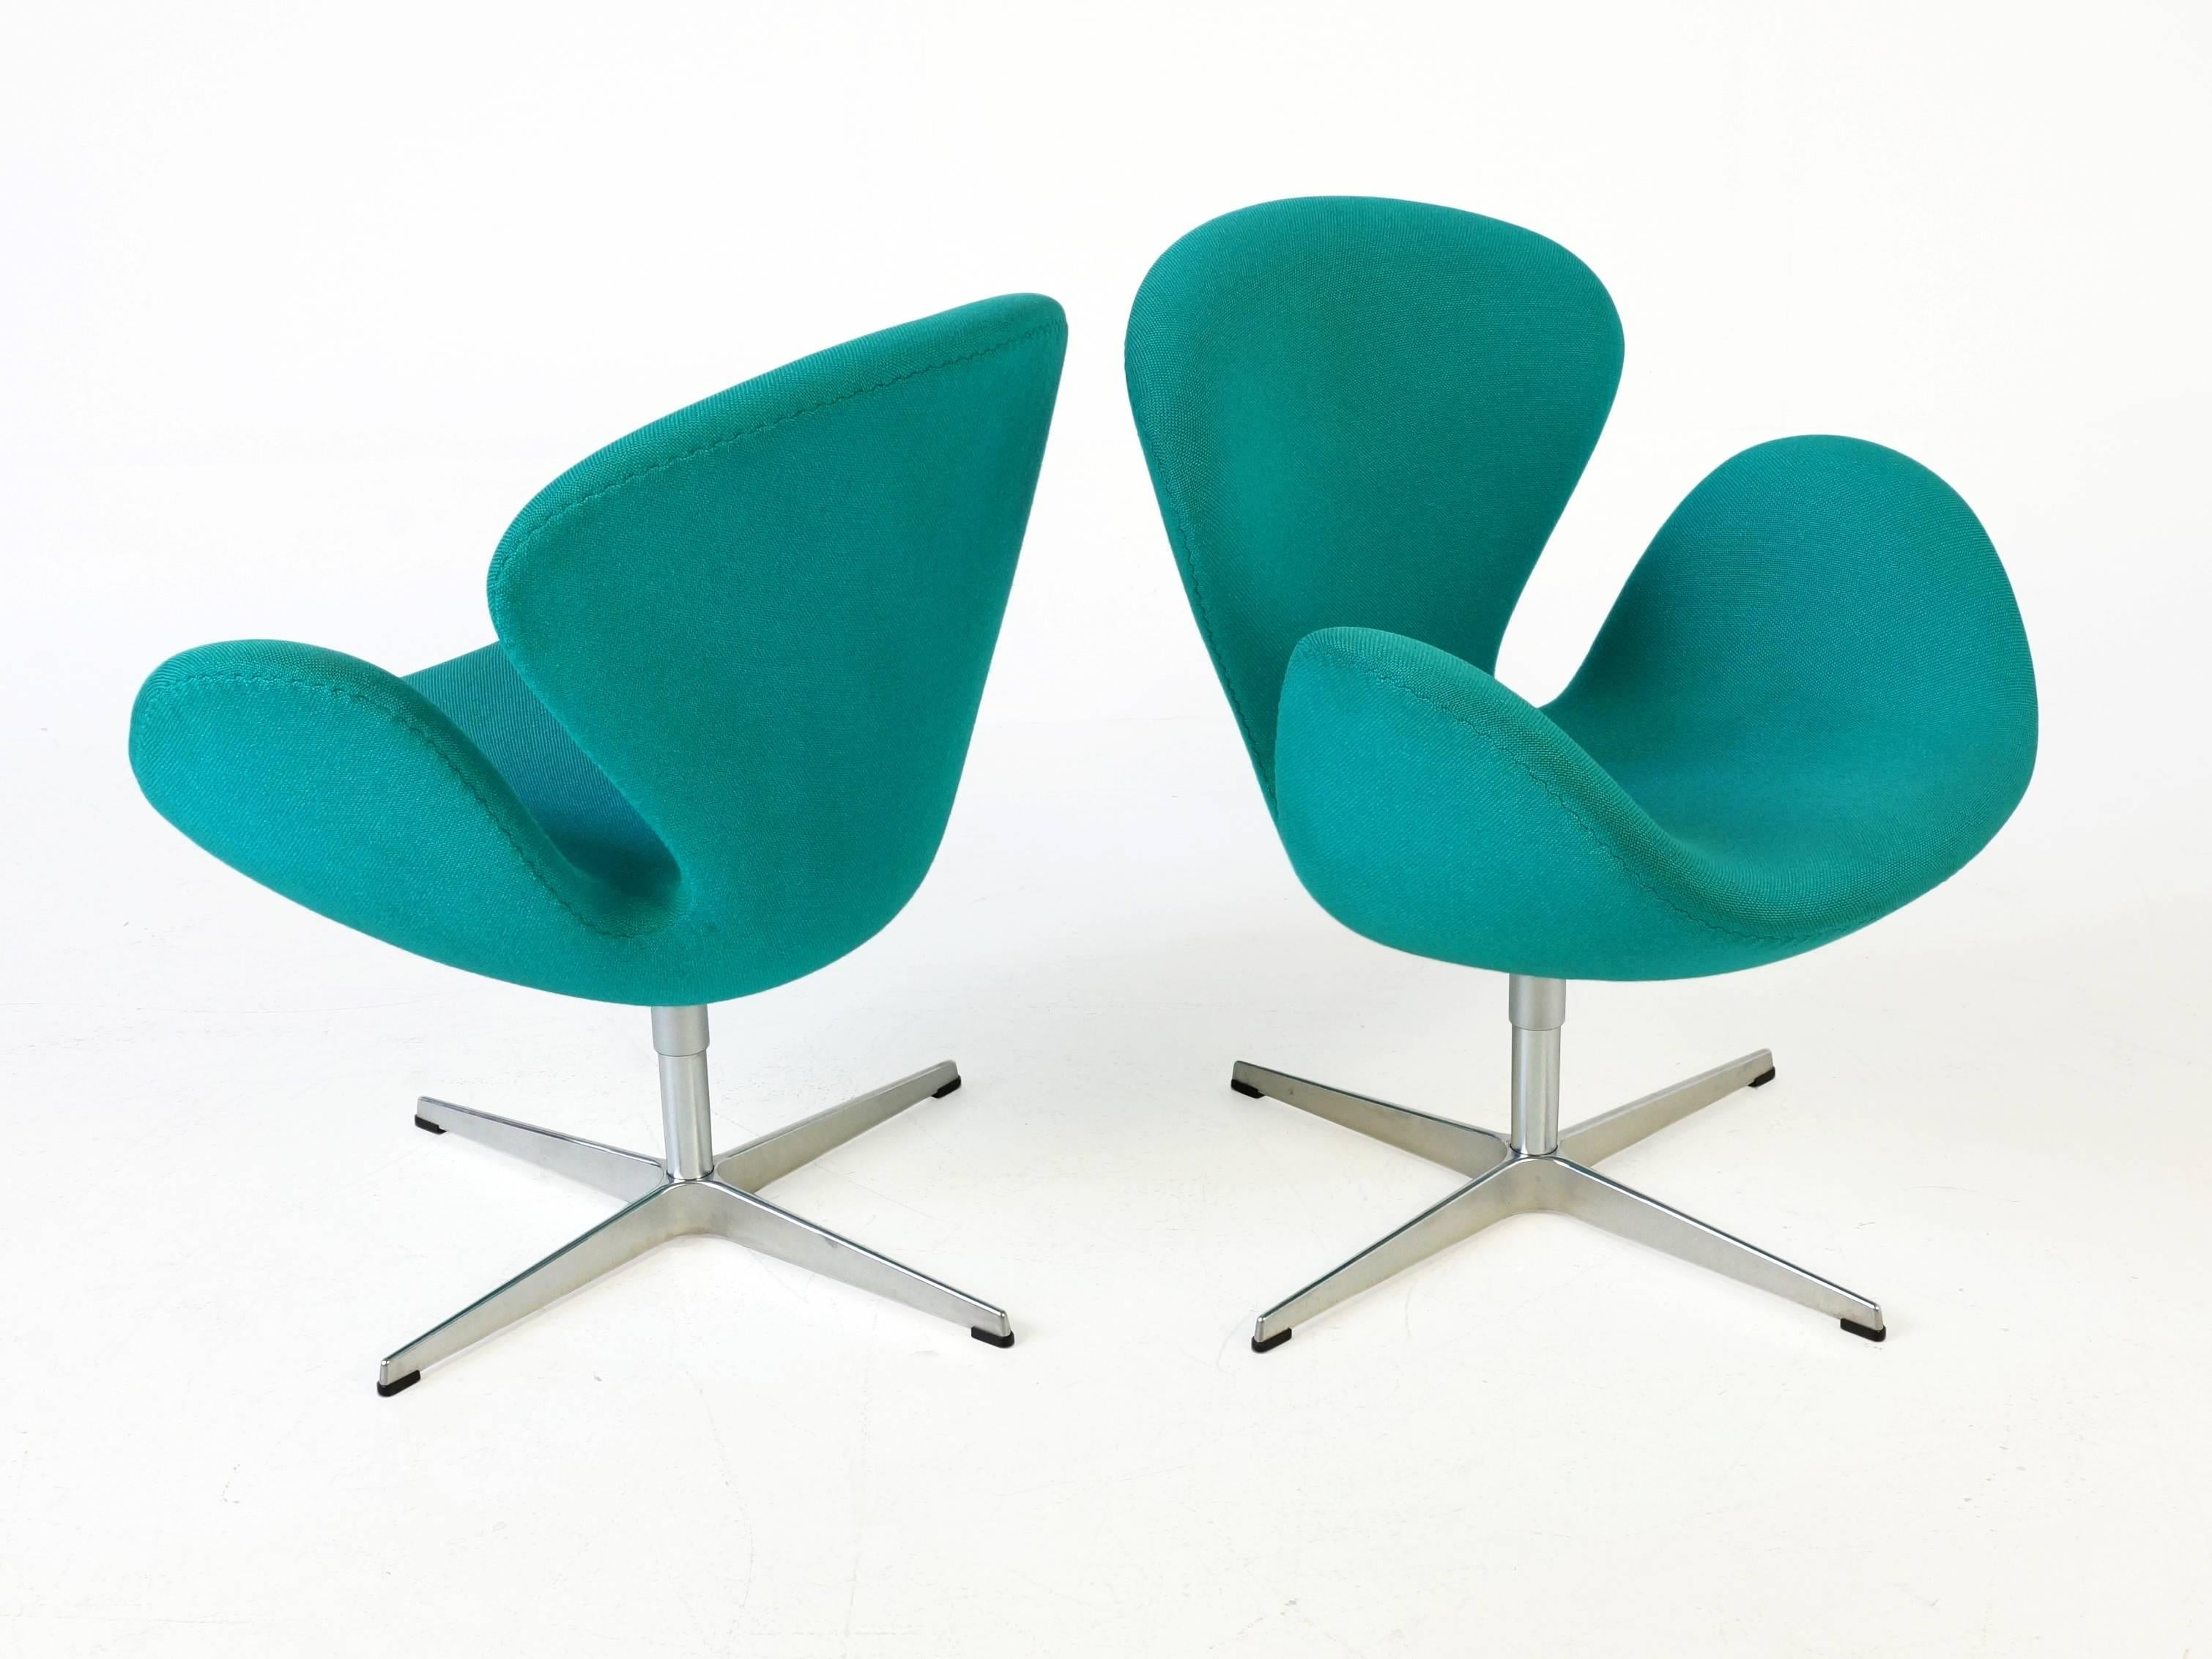 Aluminum Set of Two Turquoise Swan Chairs by Arne Jacobsen